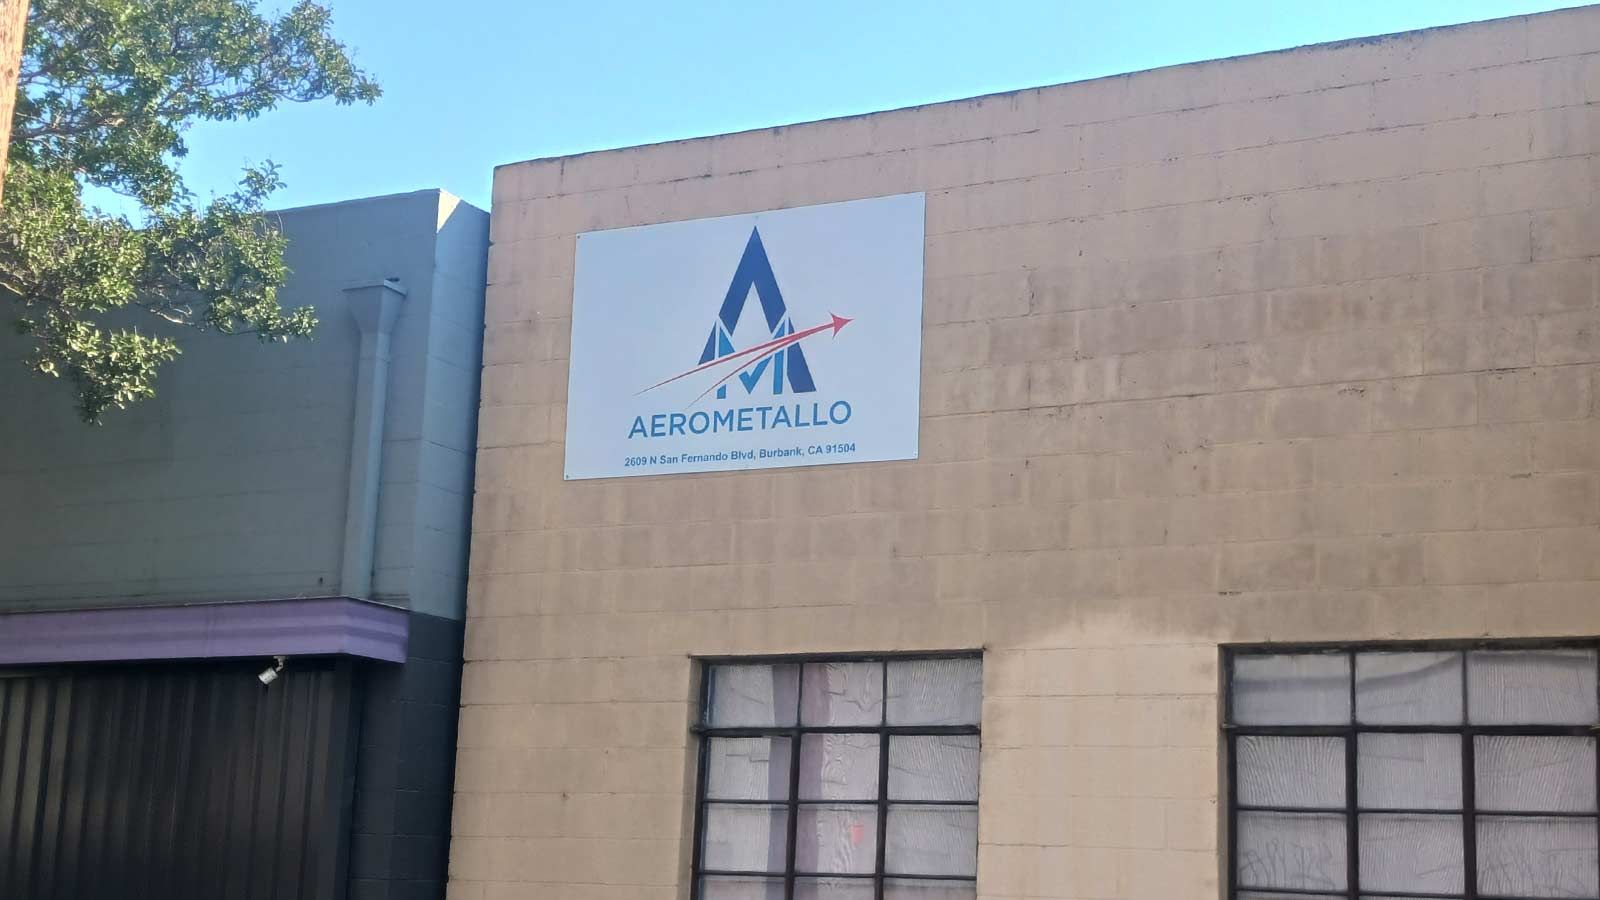 Aerometallo aluminum sign attached to the building